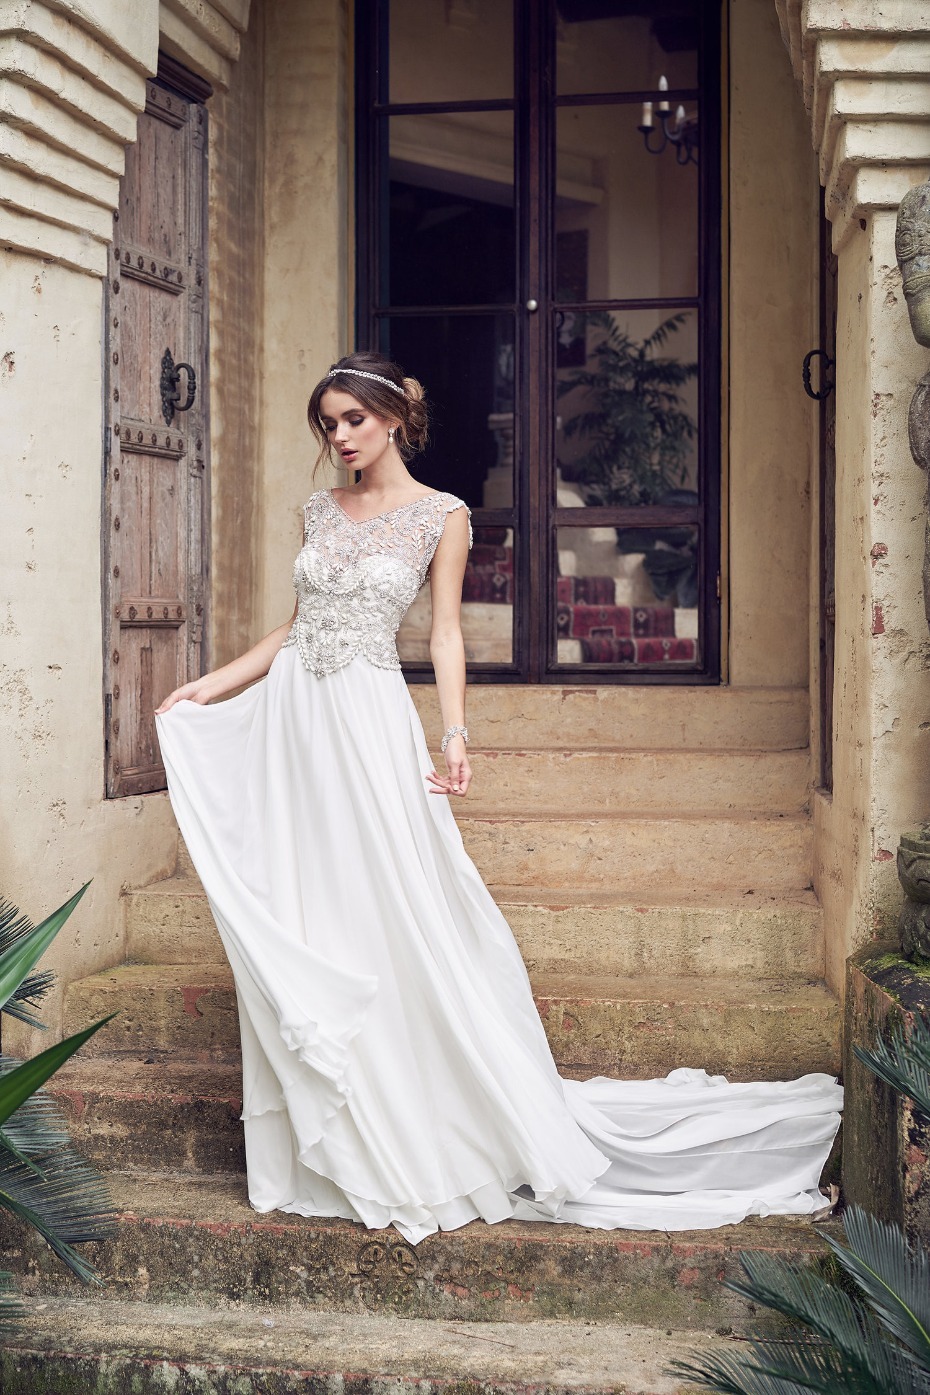 7 Tips for Finding a Wedding Dress